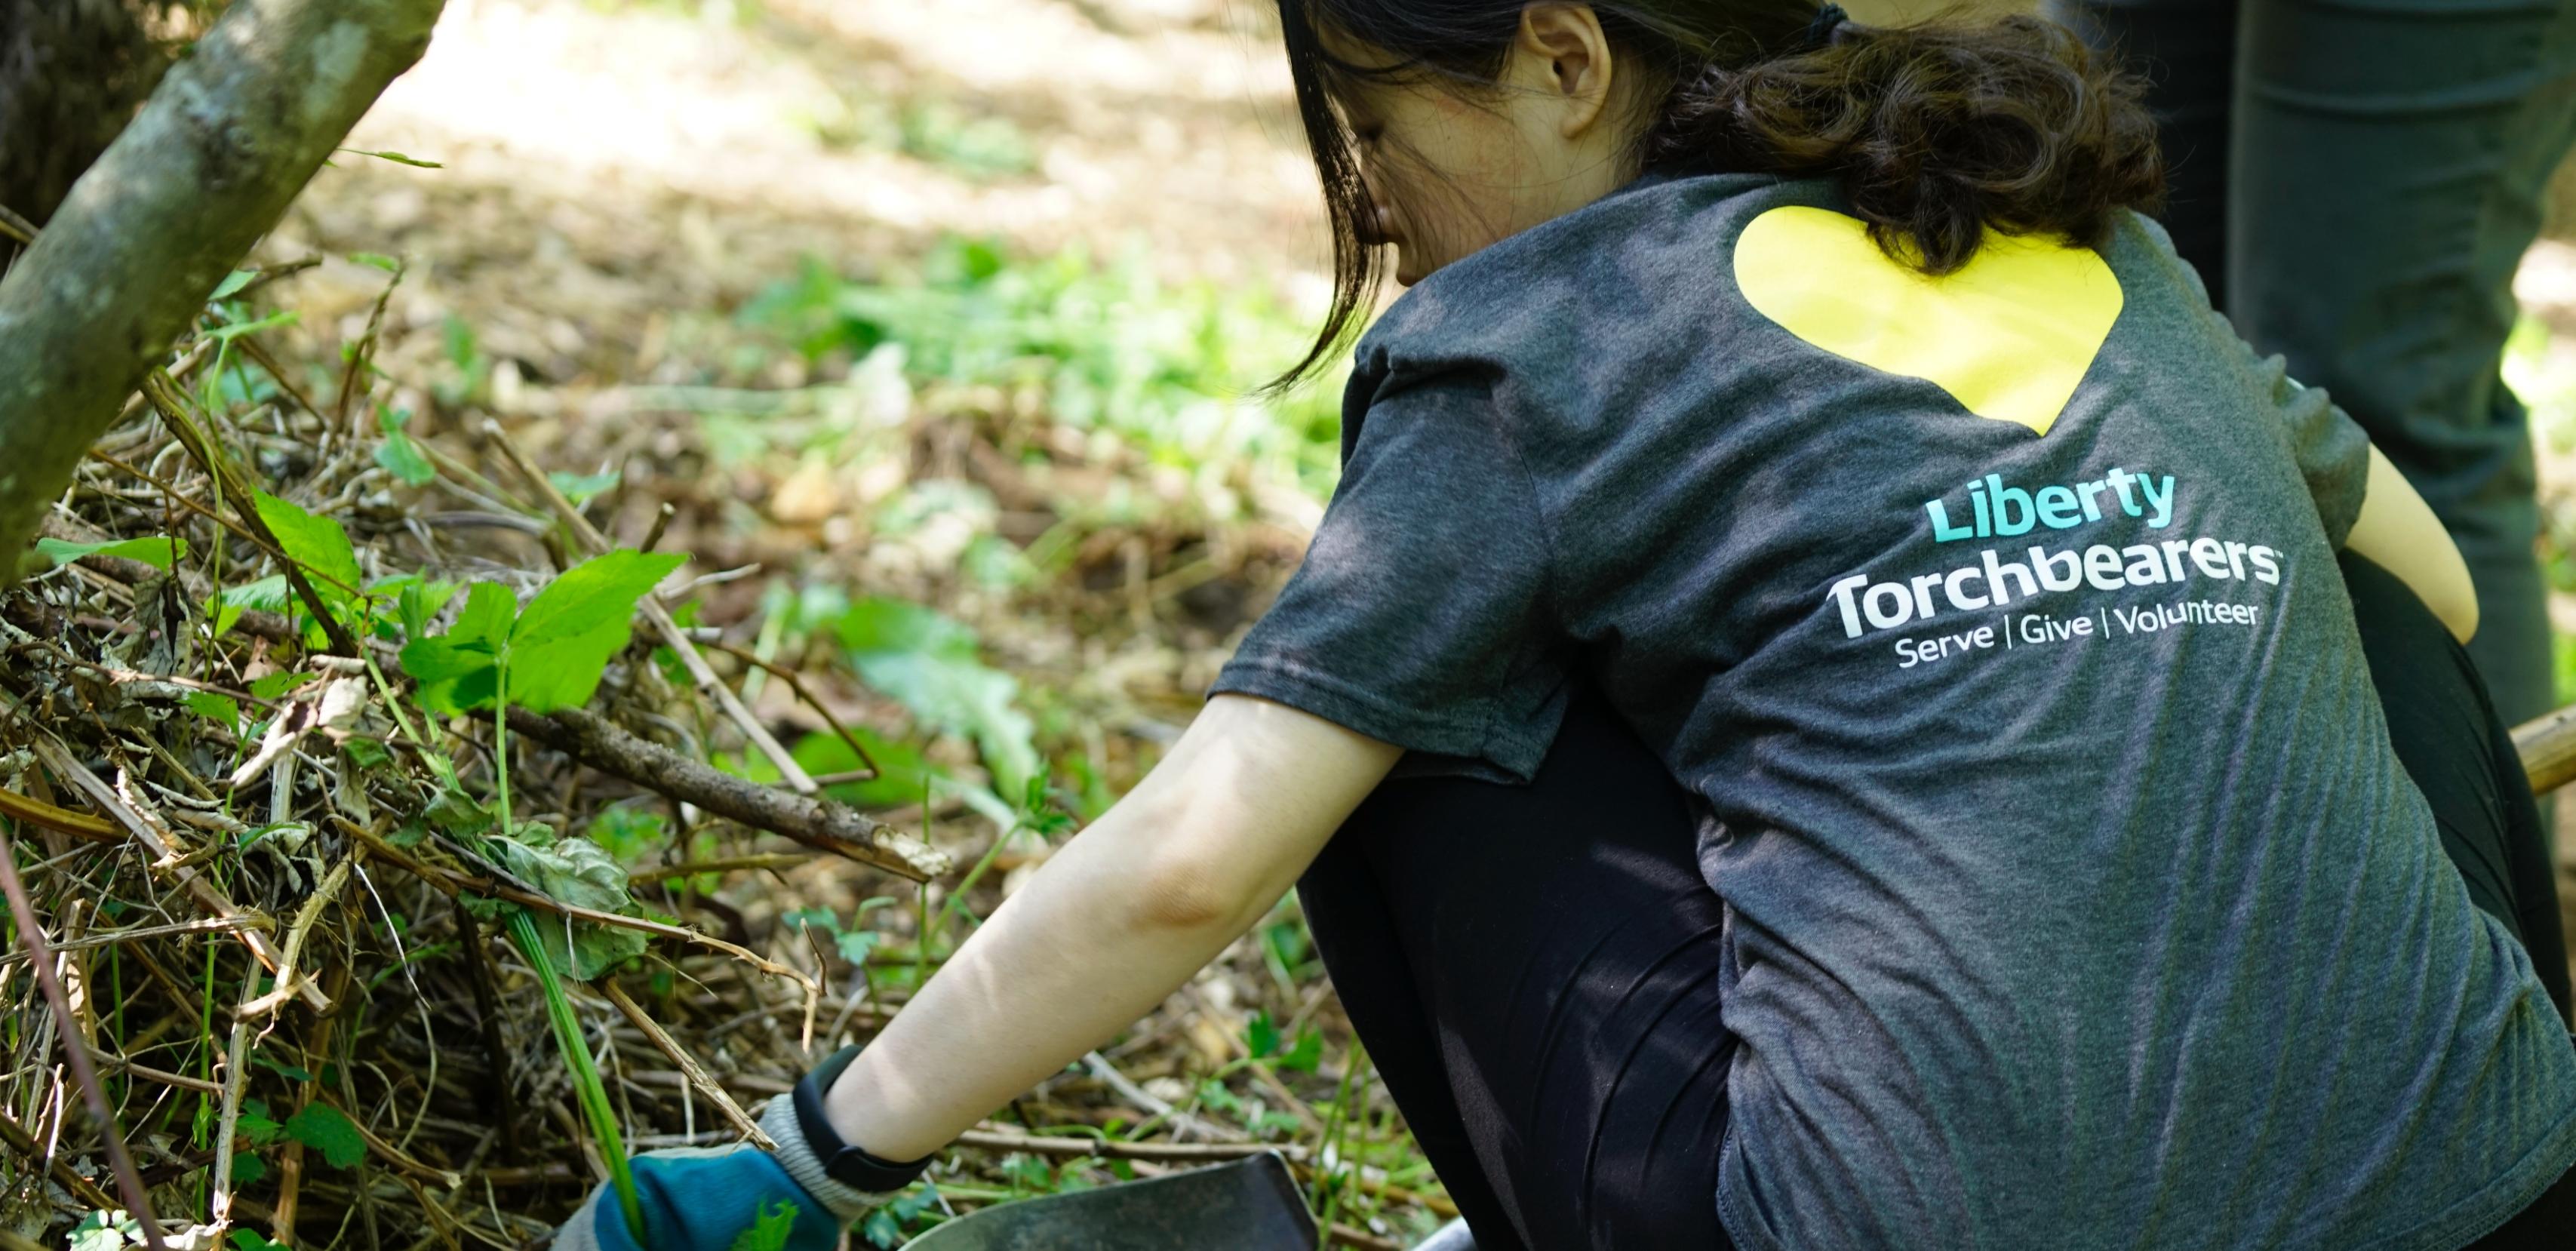 Liberty Mutual gardening outdoors as part of Serve with Liberty - a volunteer day program